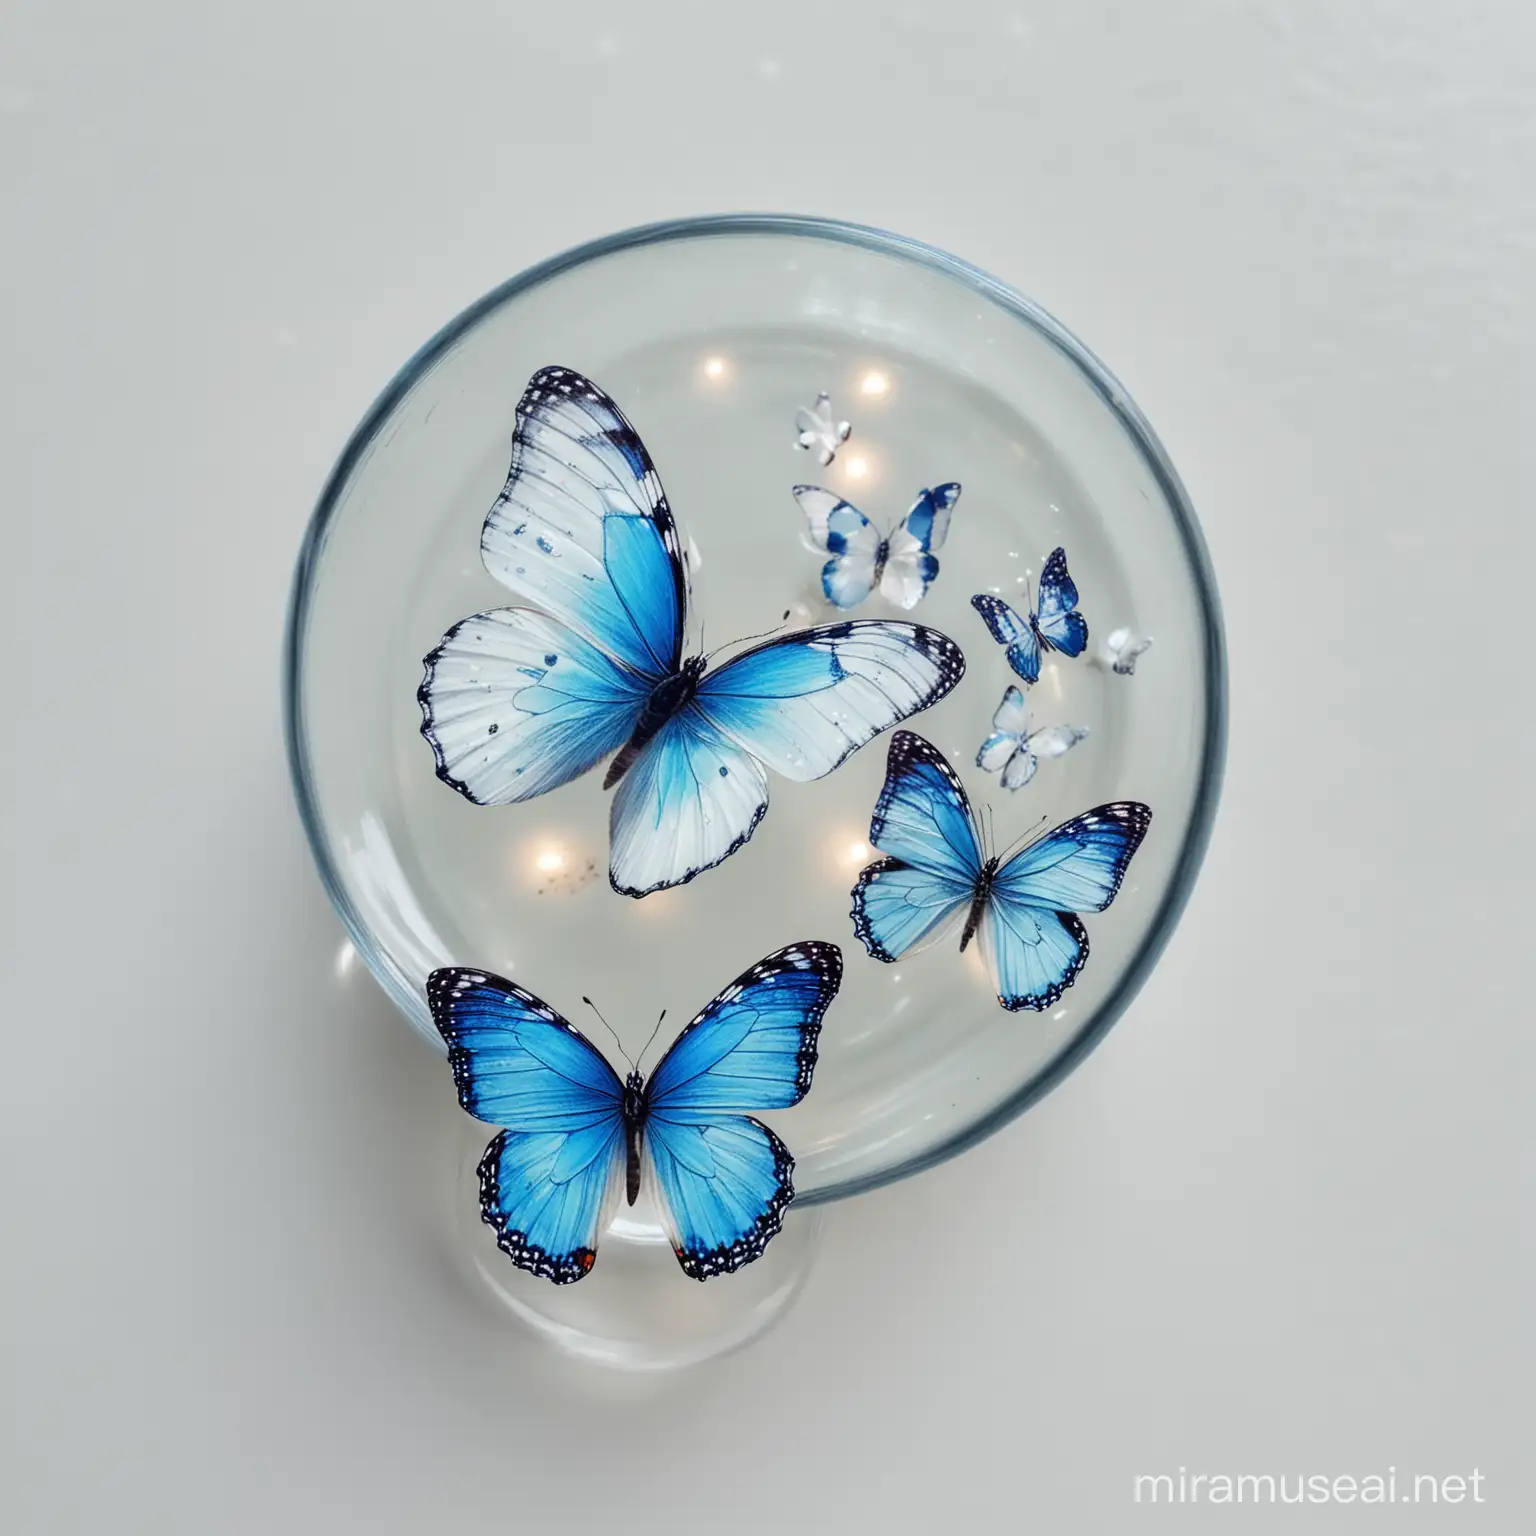 blue and white, fancy, natural , glass, flower, cute, instagramable, small butterflies, full background
